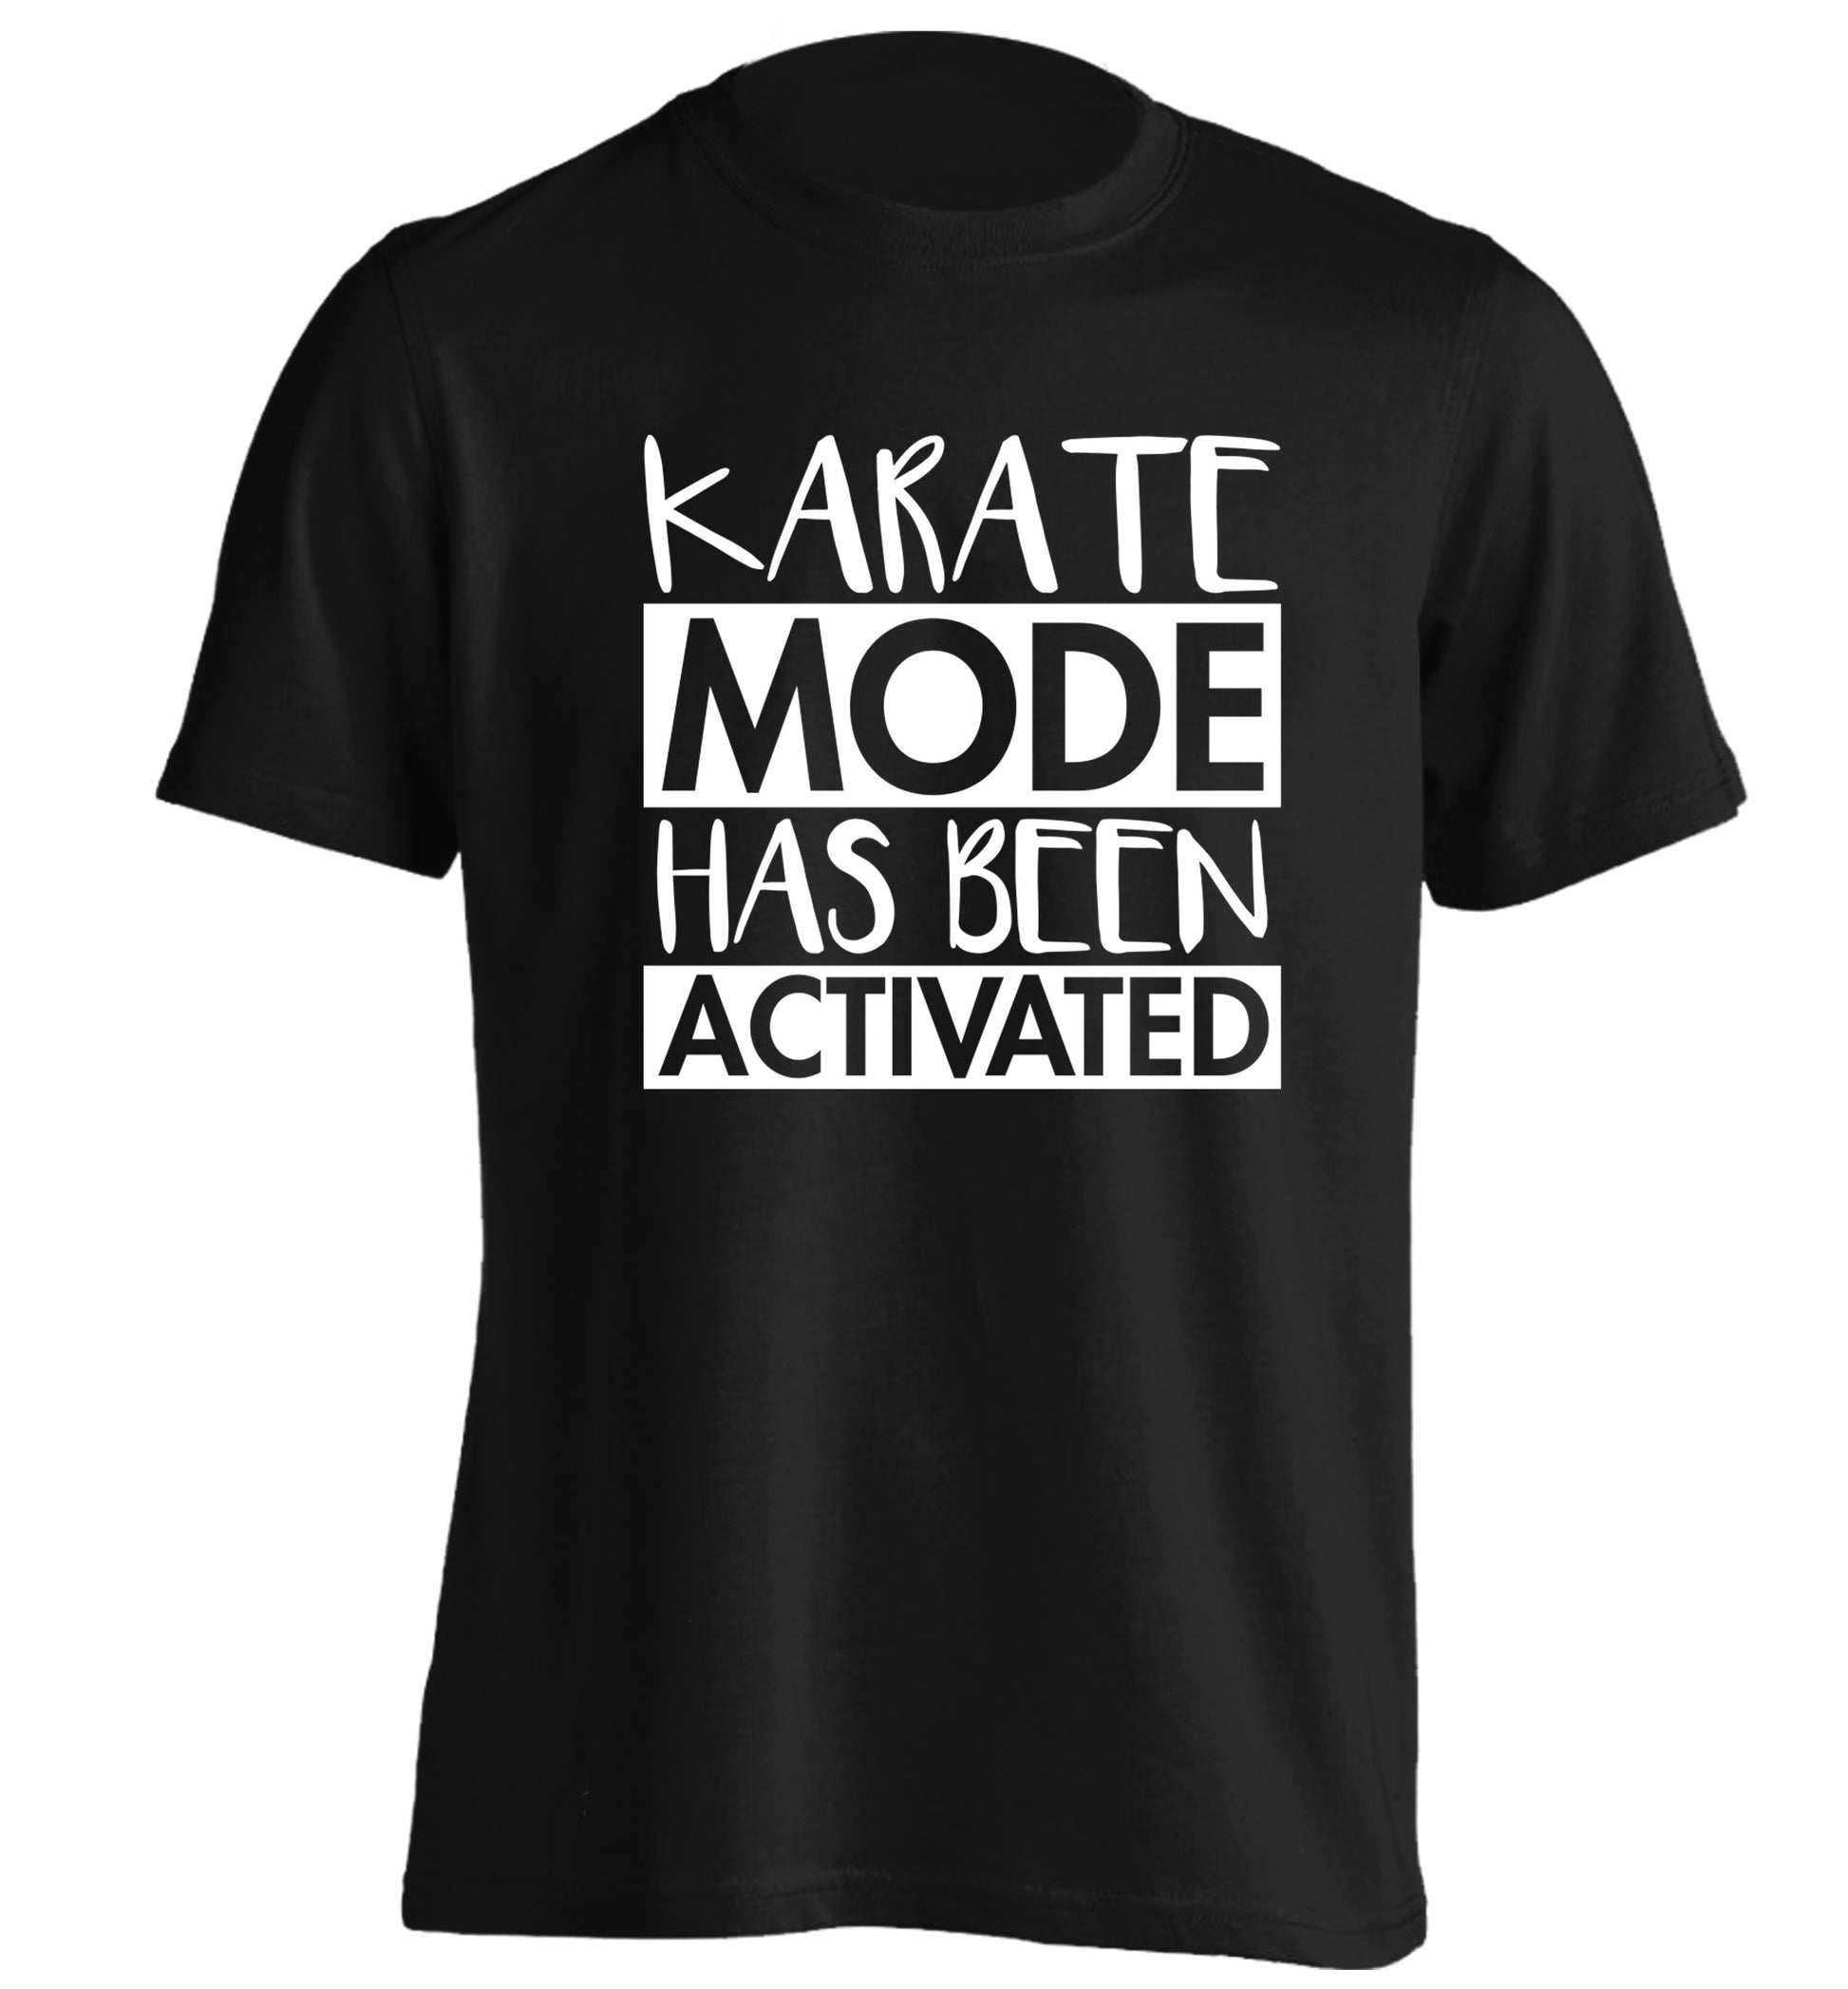 Karate mode activated adults unisex black Tshirt 2XL